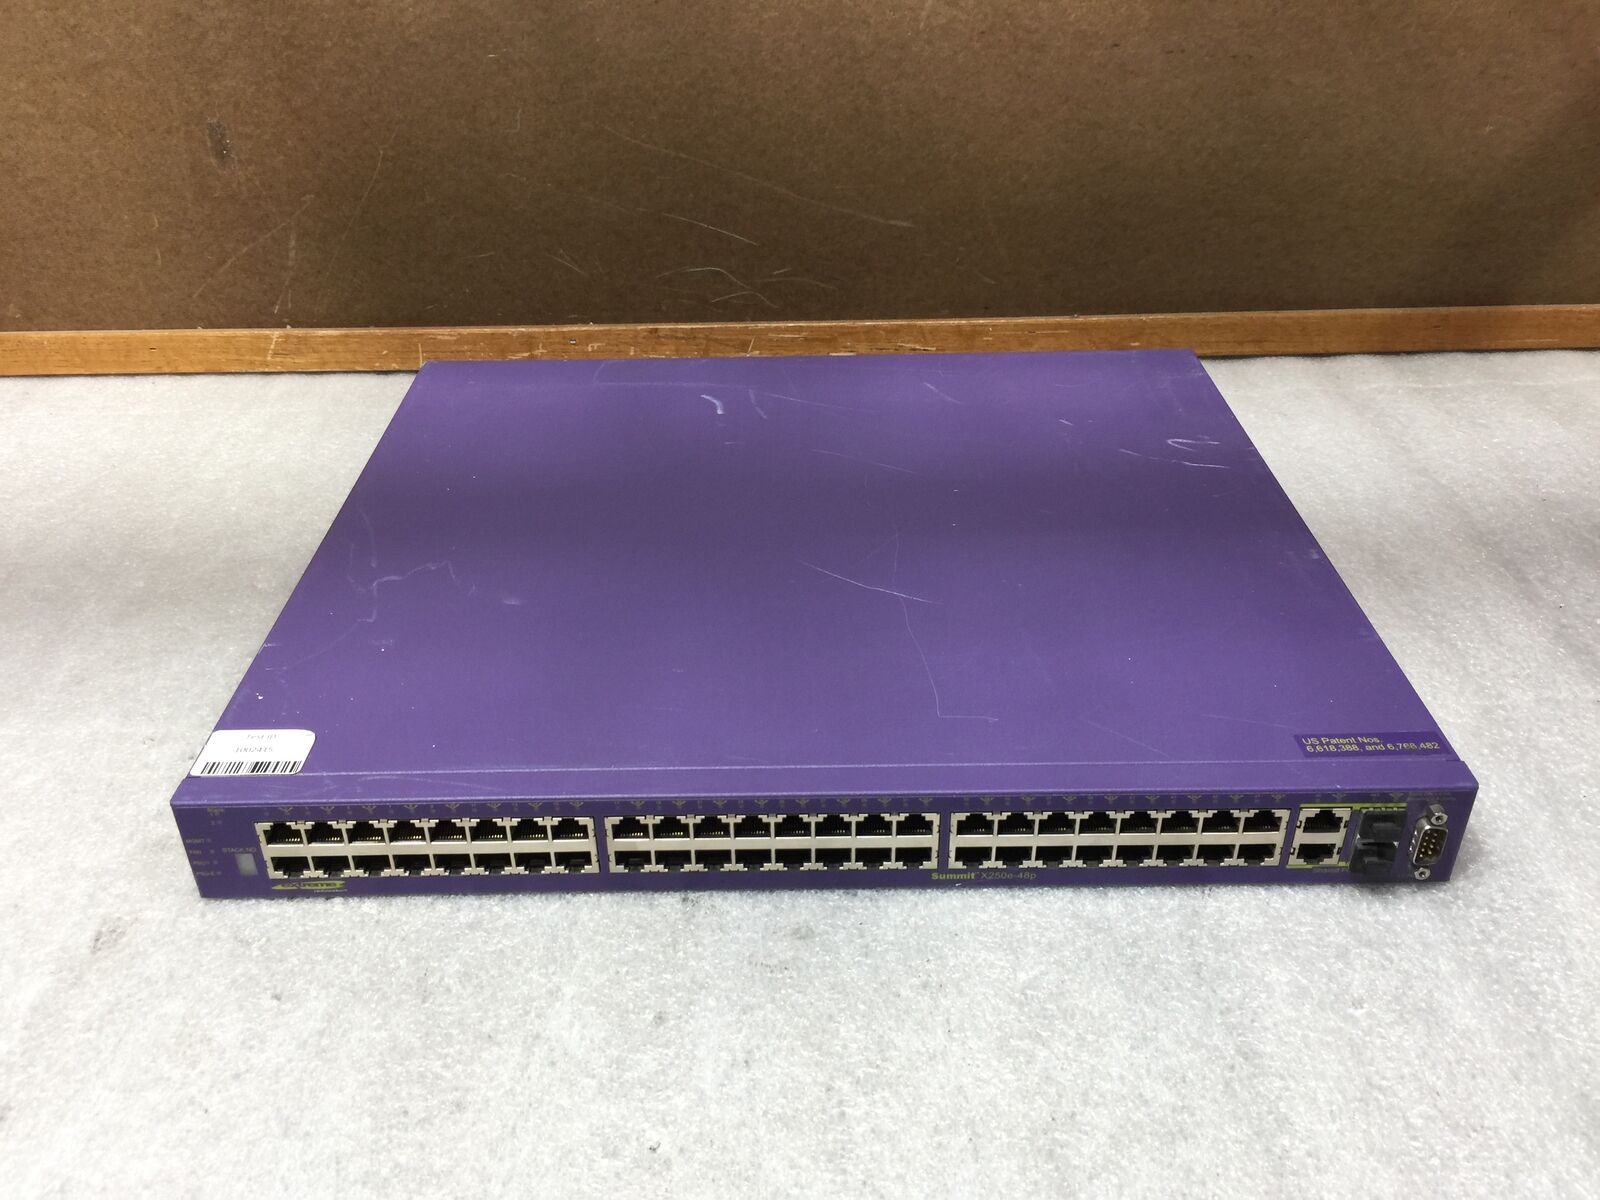 Extreme Networks Summit X250e-48p 15107 48 Port Rackmount Network Switch -Tested